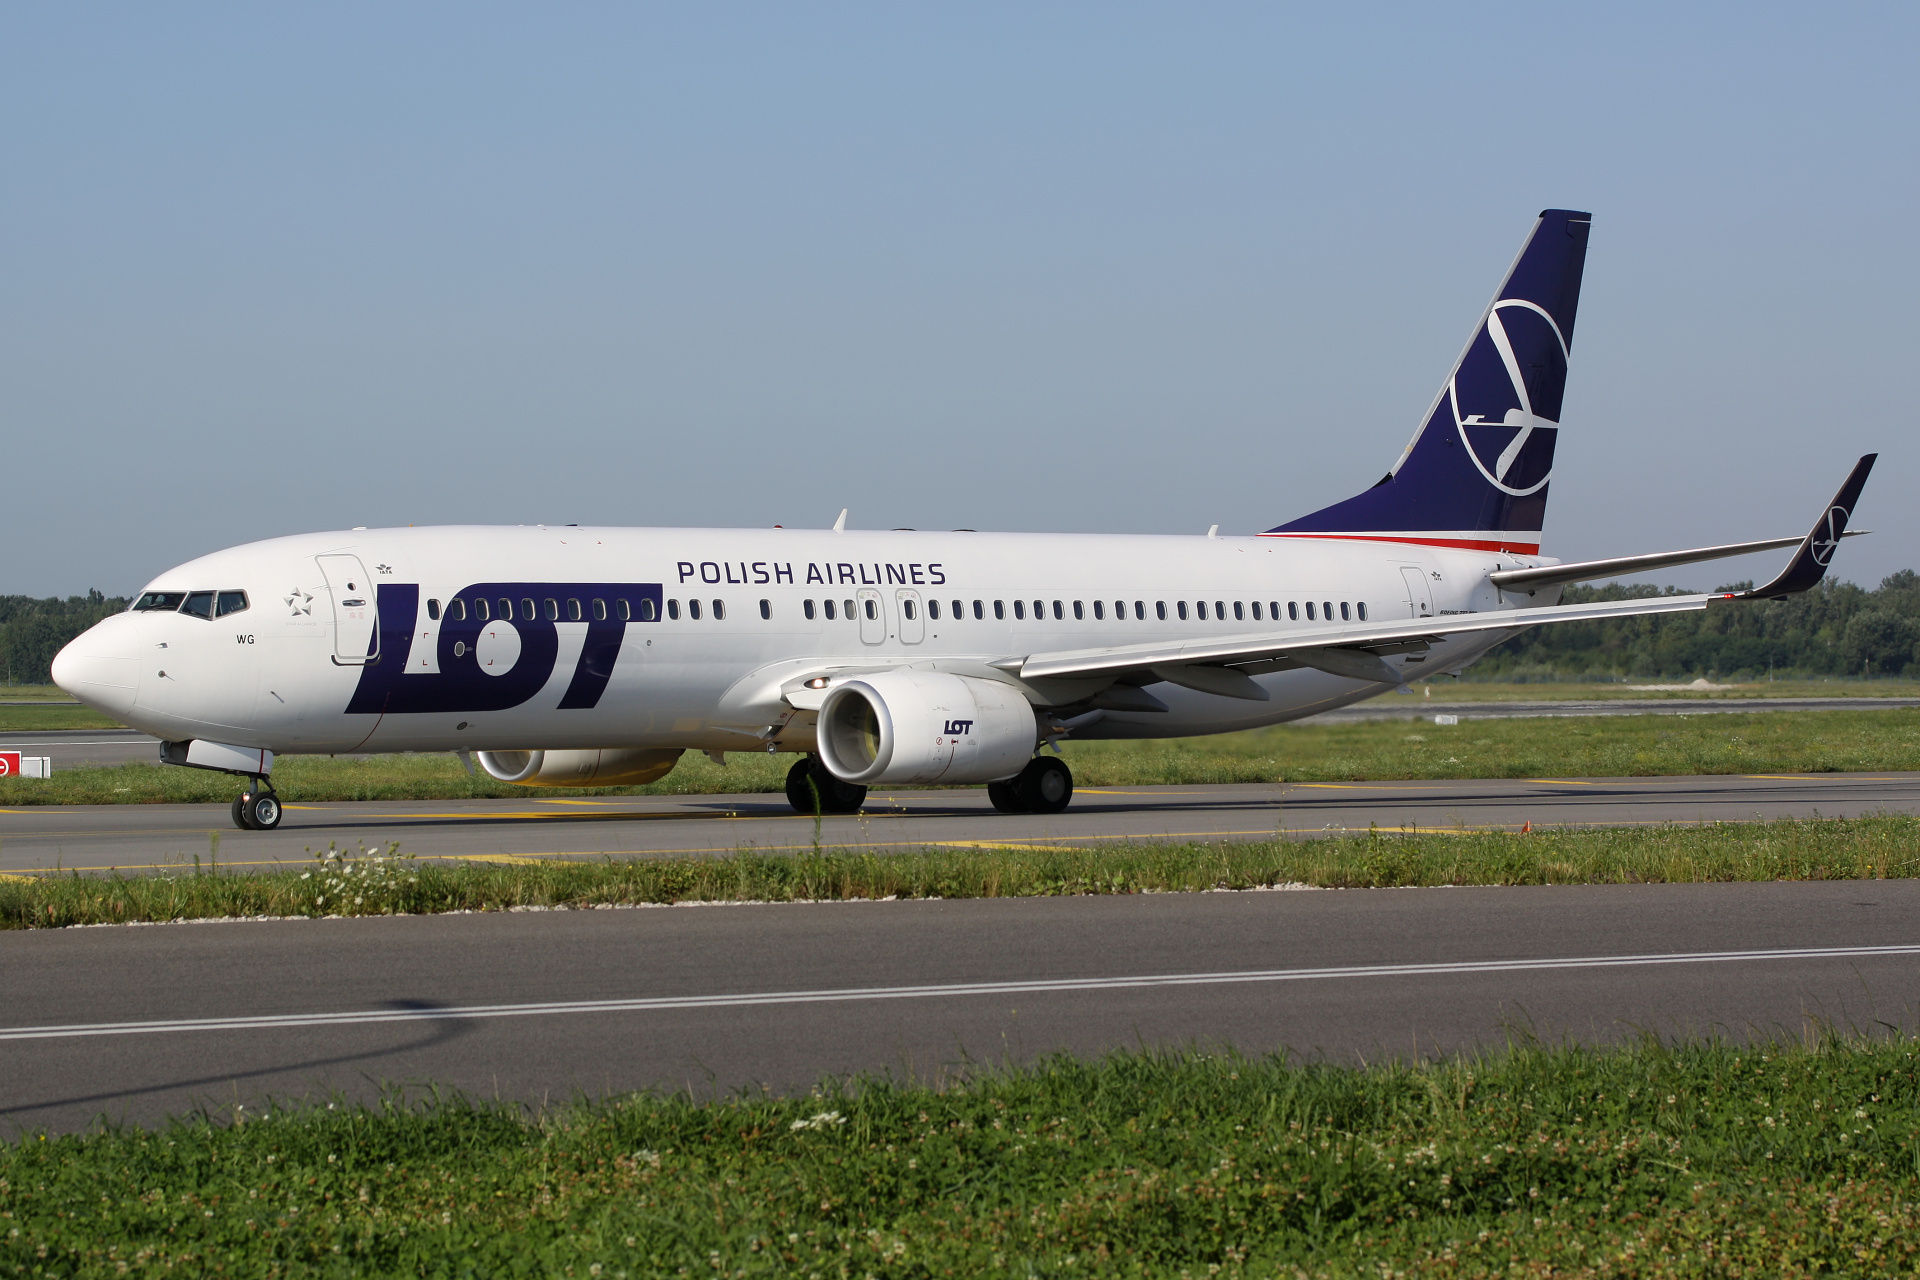 SP-LWG (Aircraft » EPWA Spotting » Boeing 737-800 » LOT Polish Airlines)